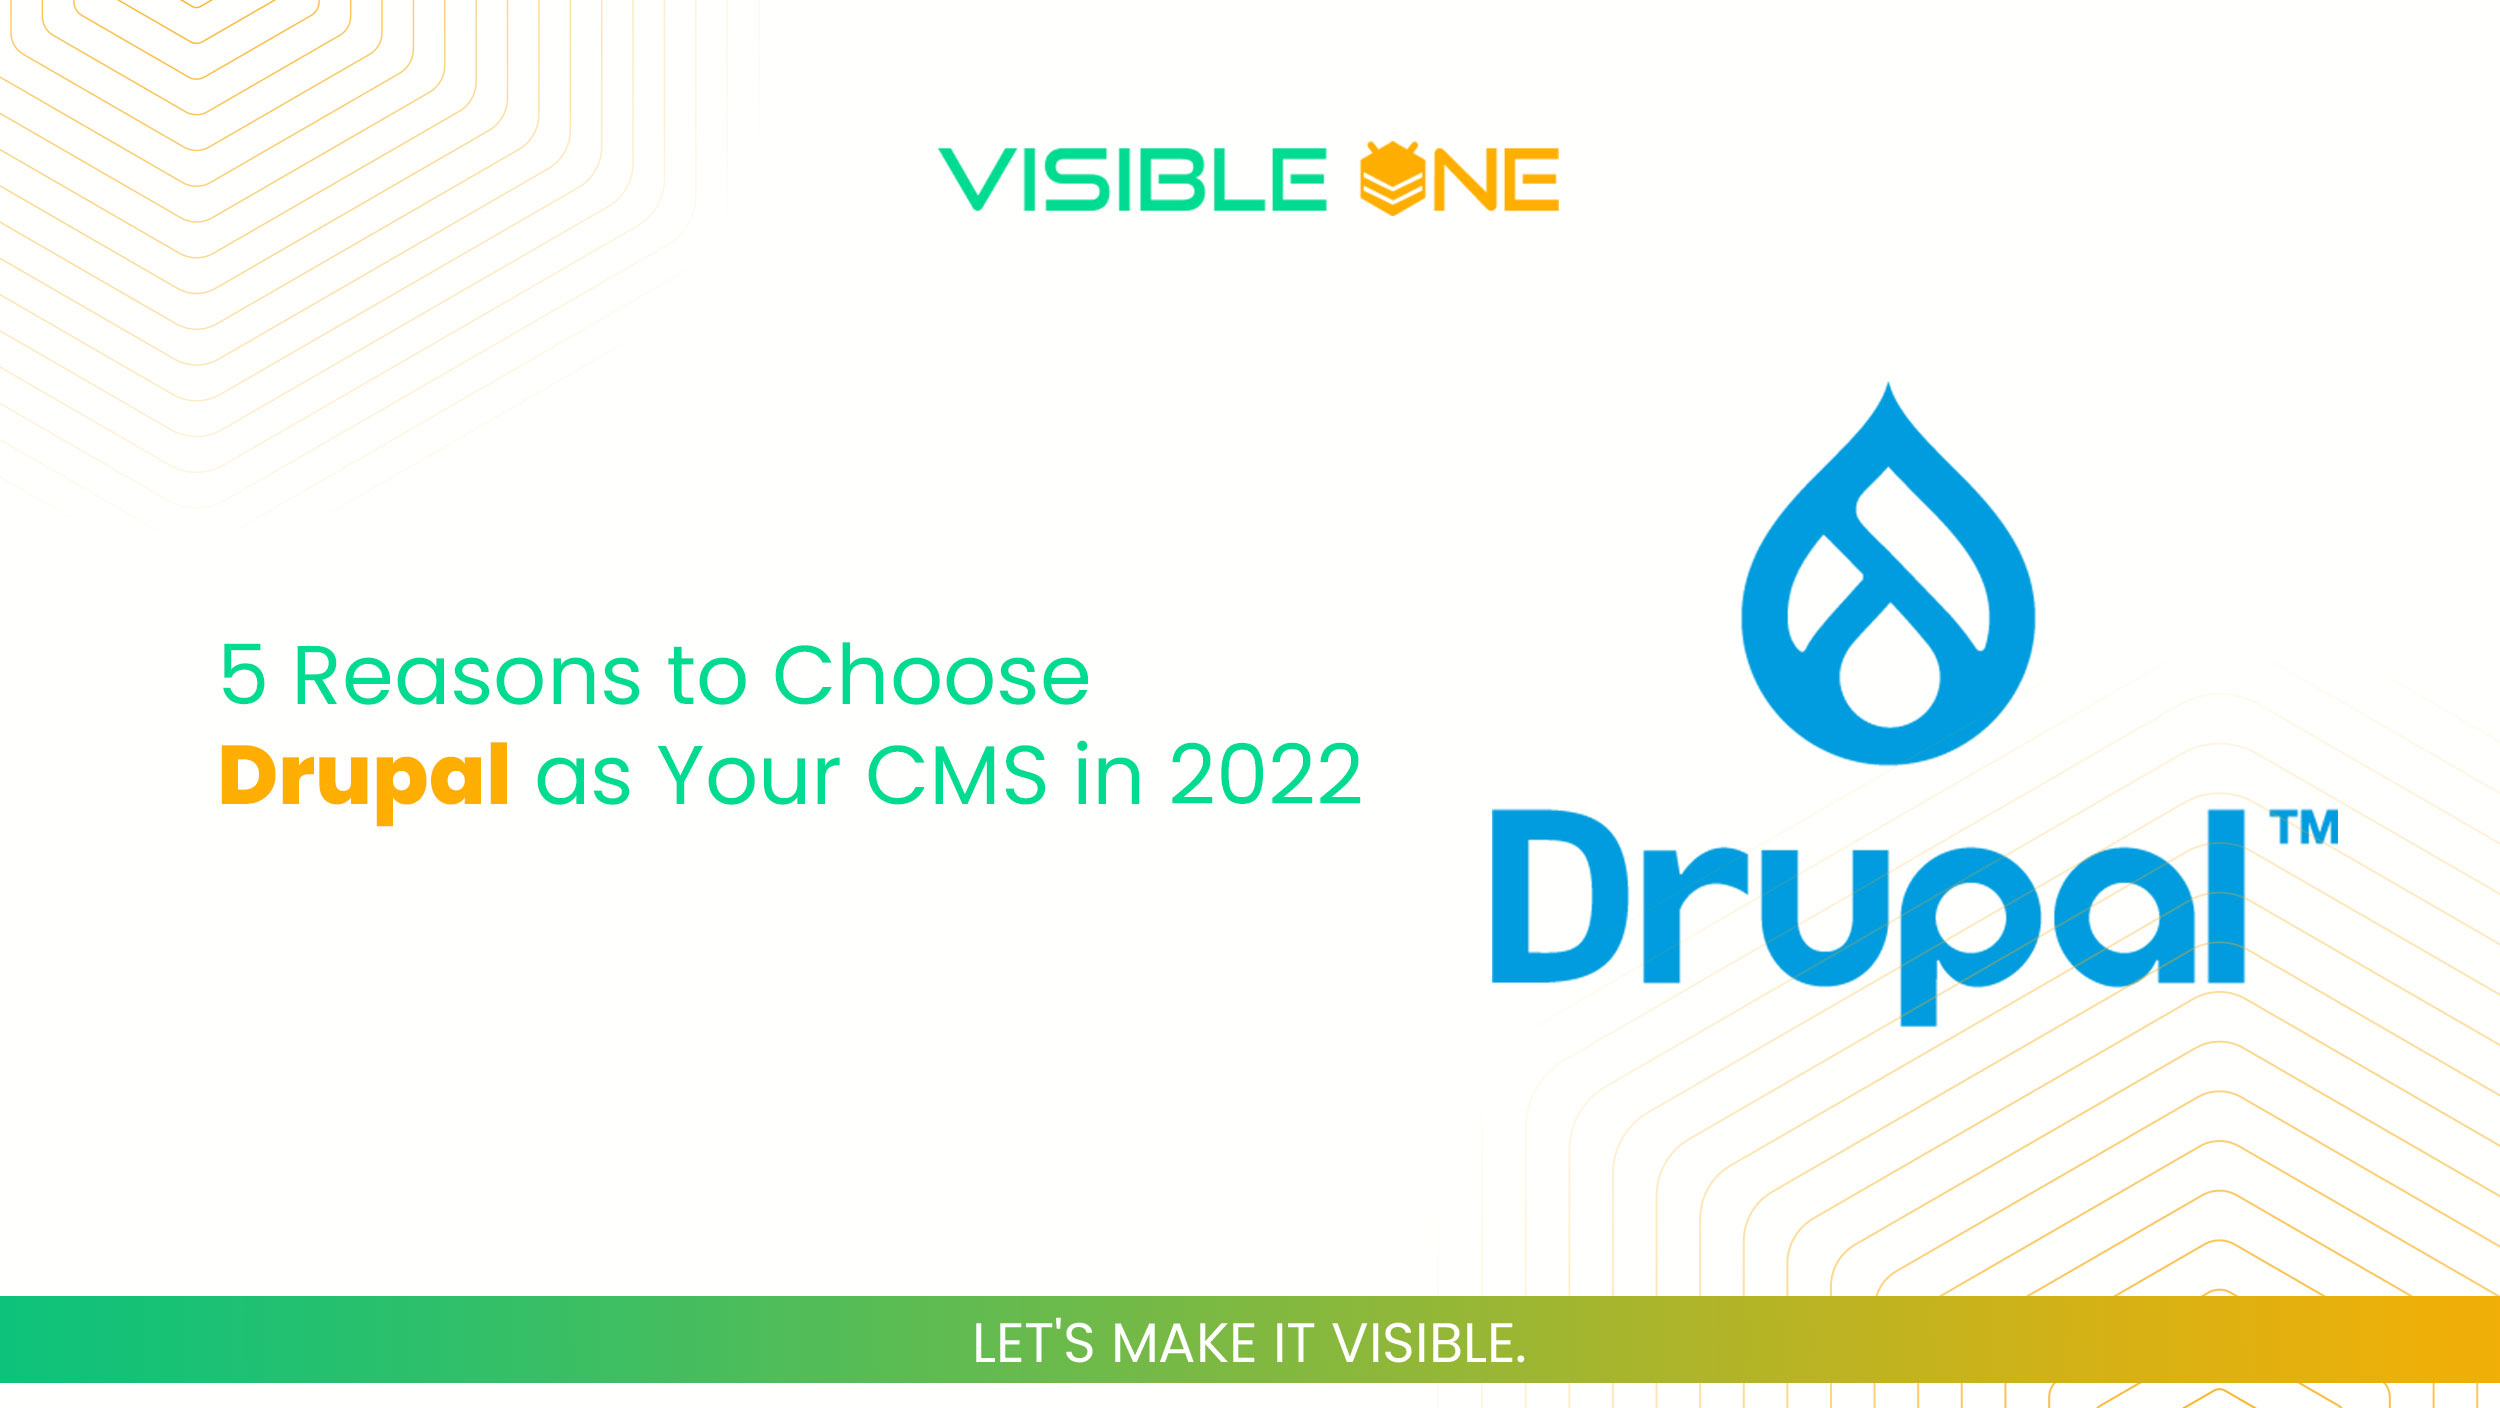 5 Reasons to Choose Drupal as Your CMS in 2022